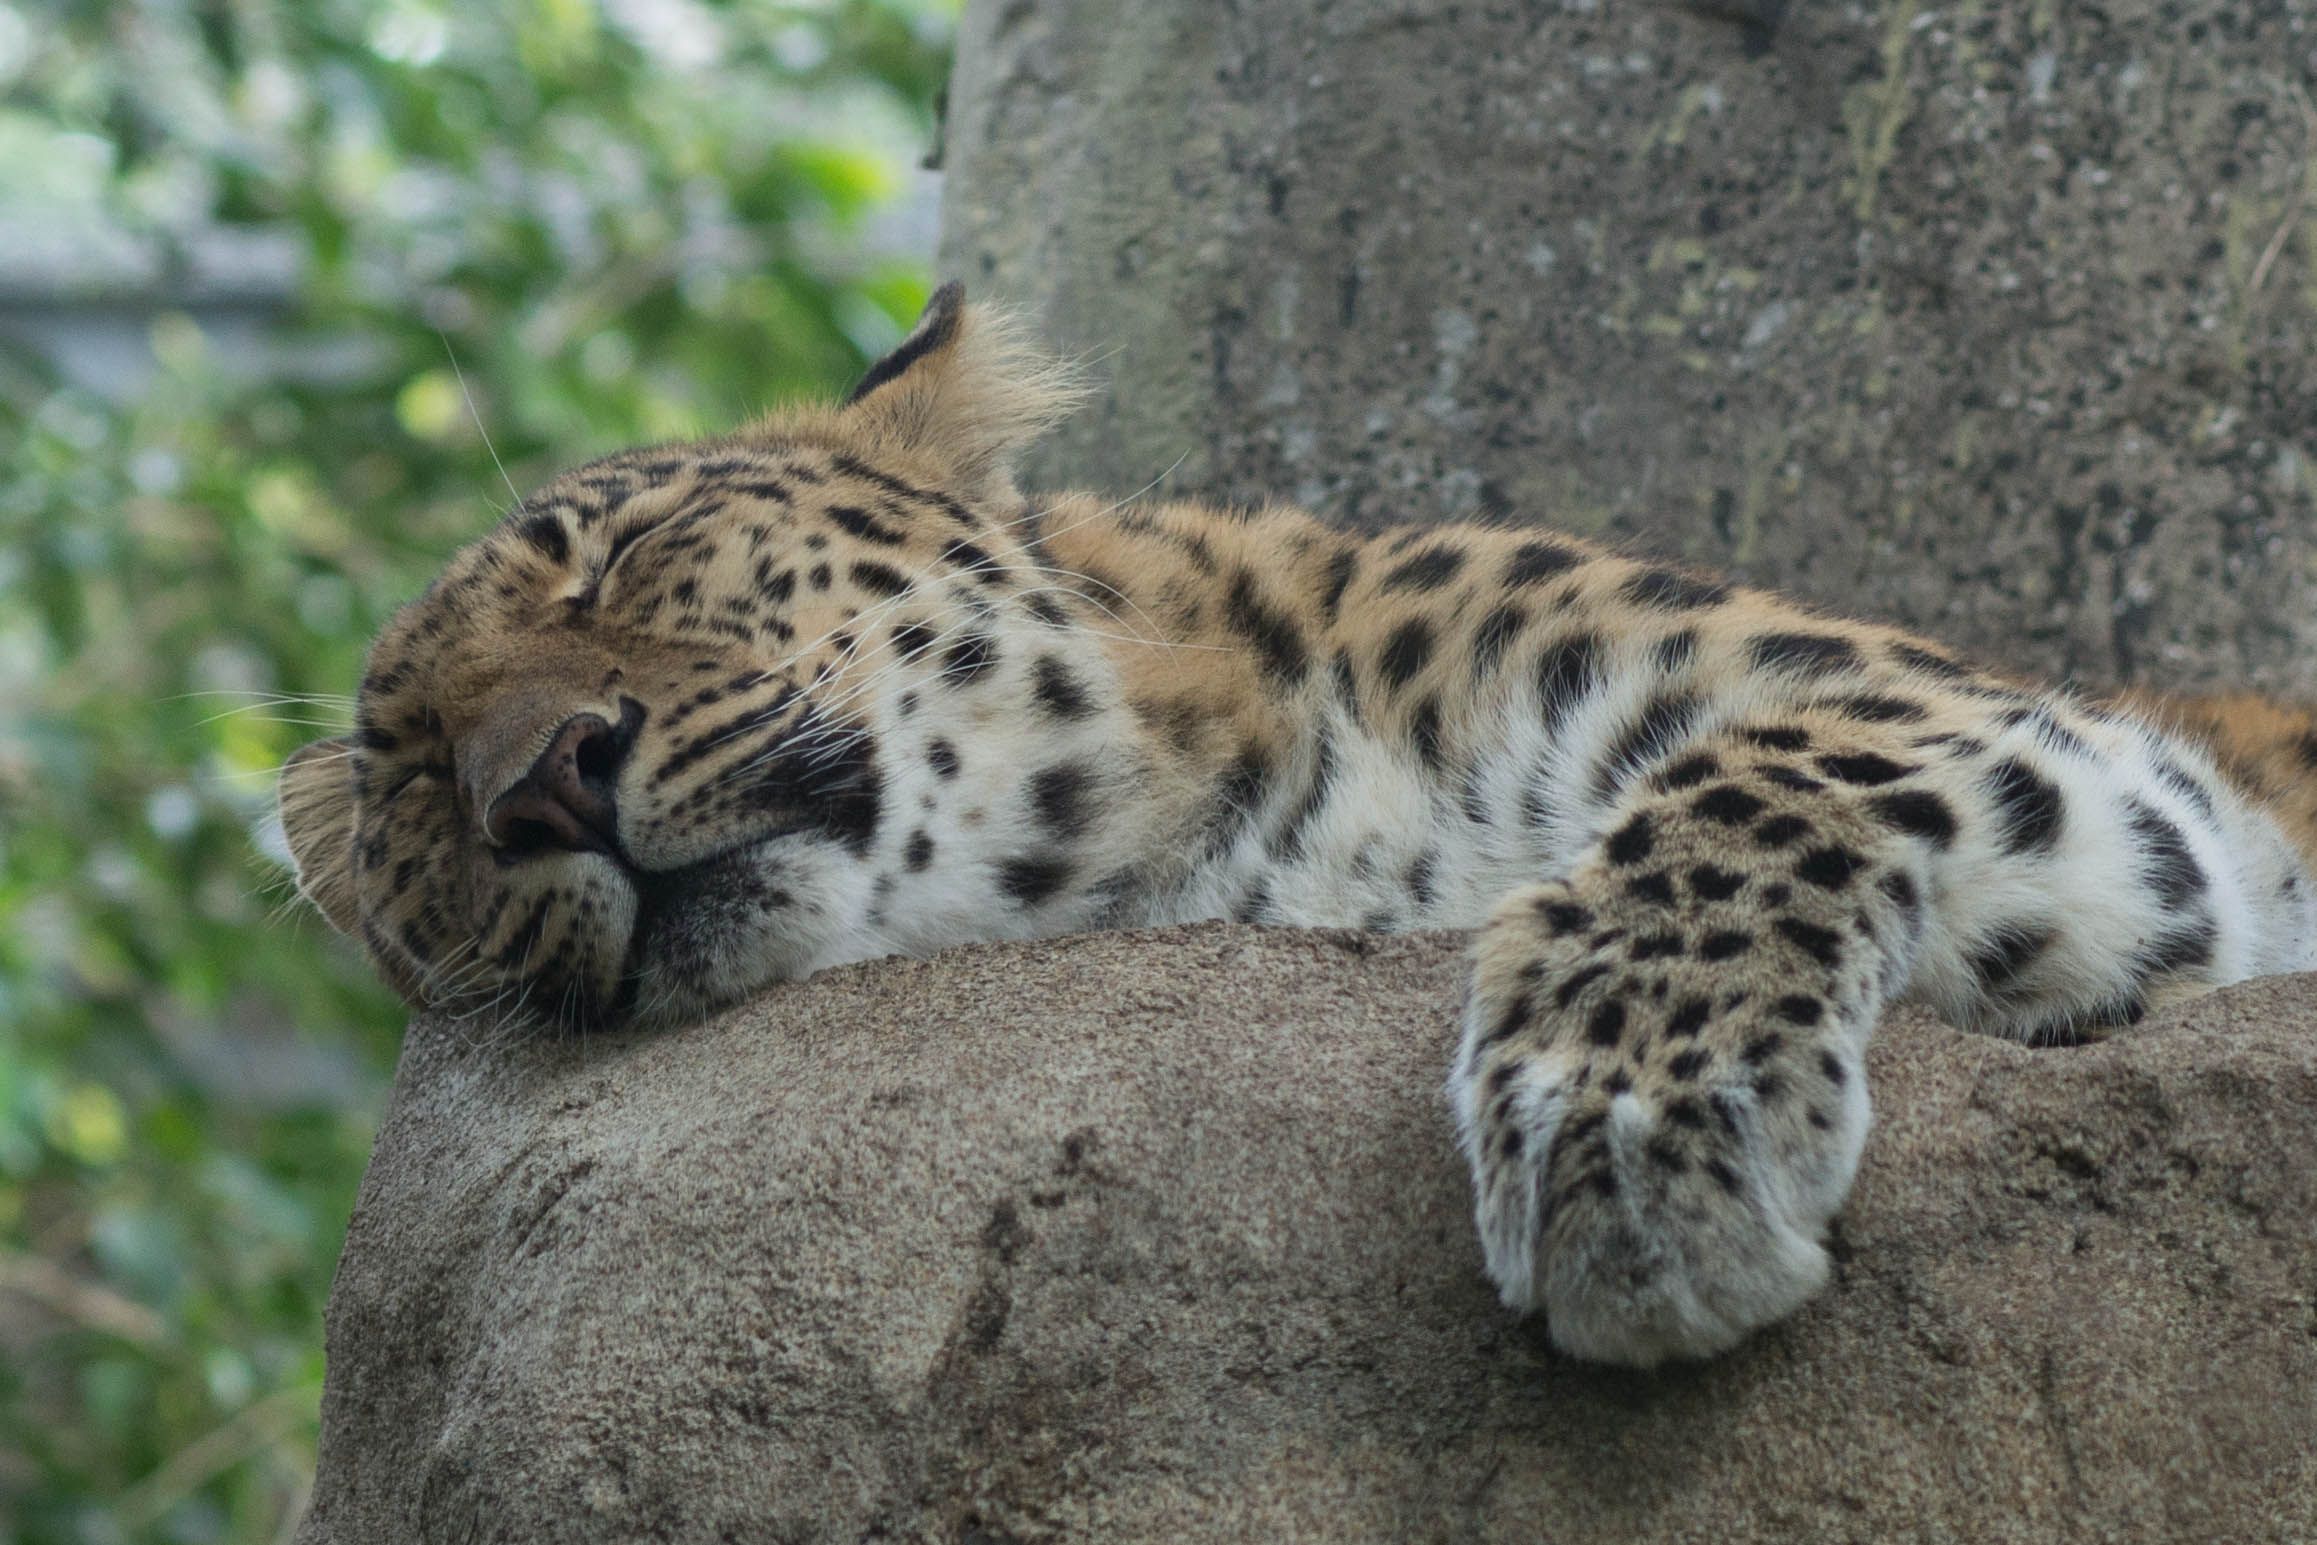 This is a picture of a Leopard napping that I took at the Santa ...